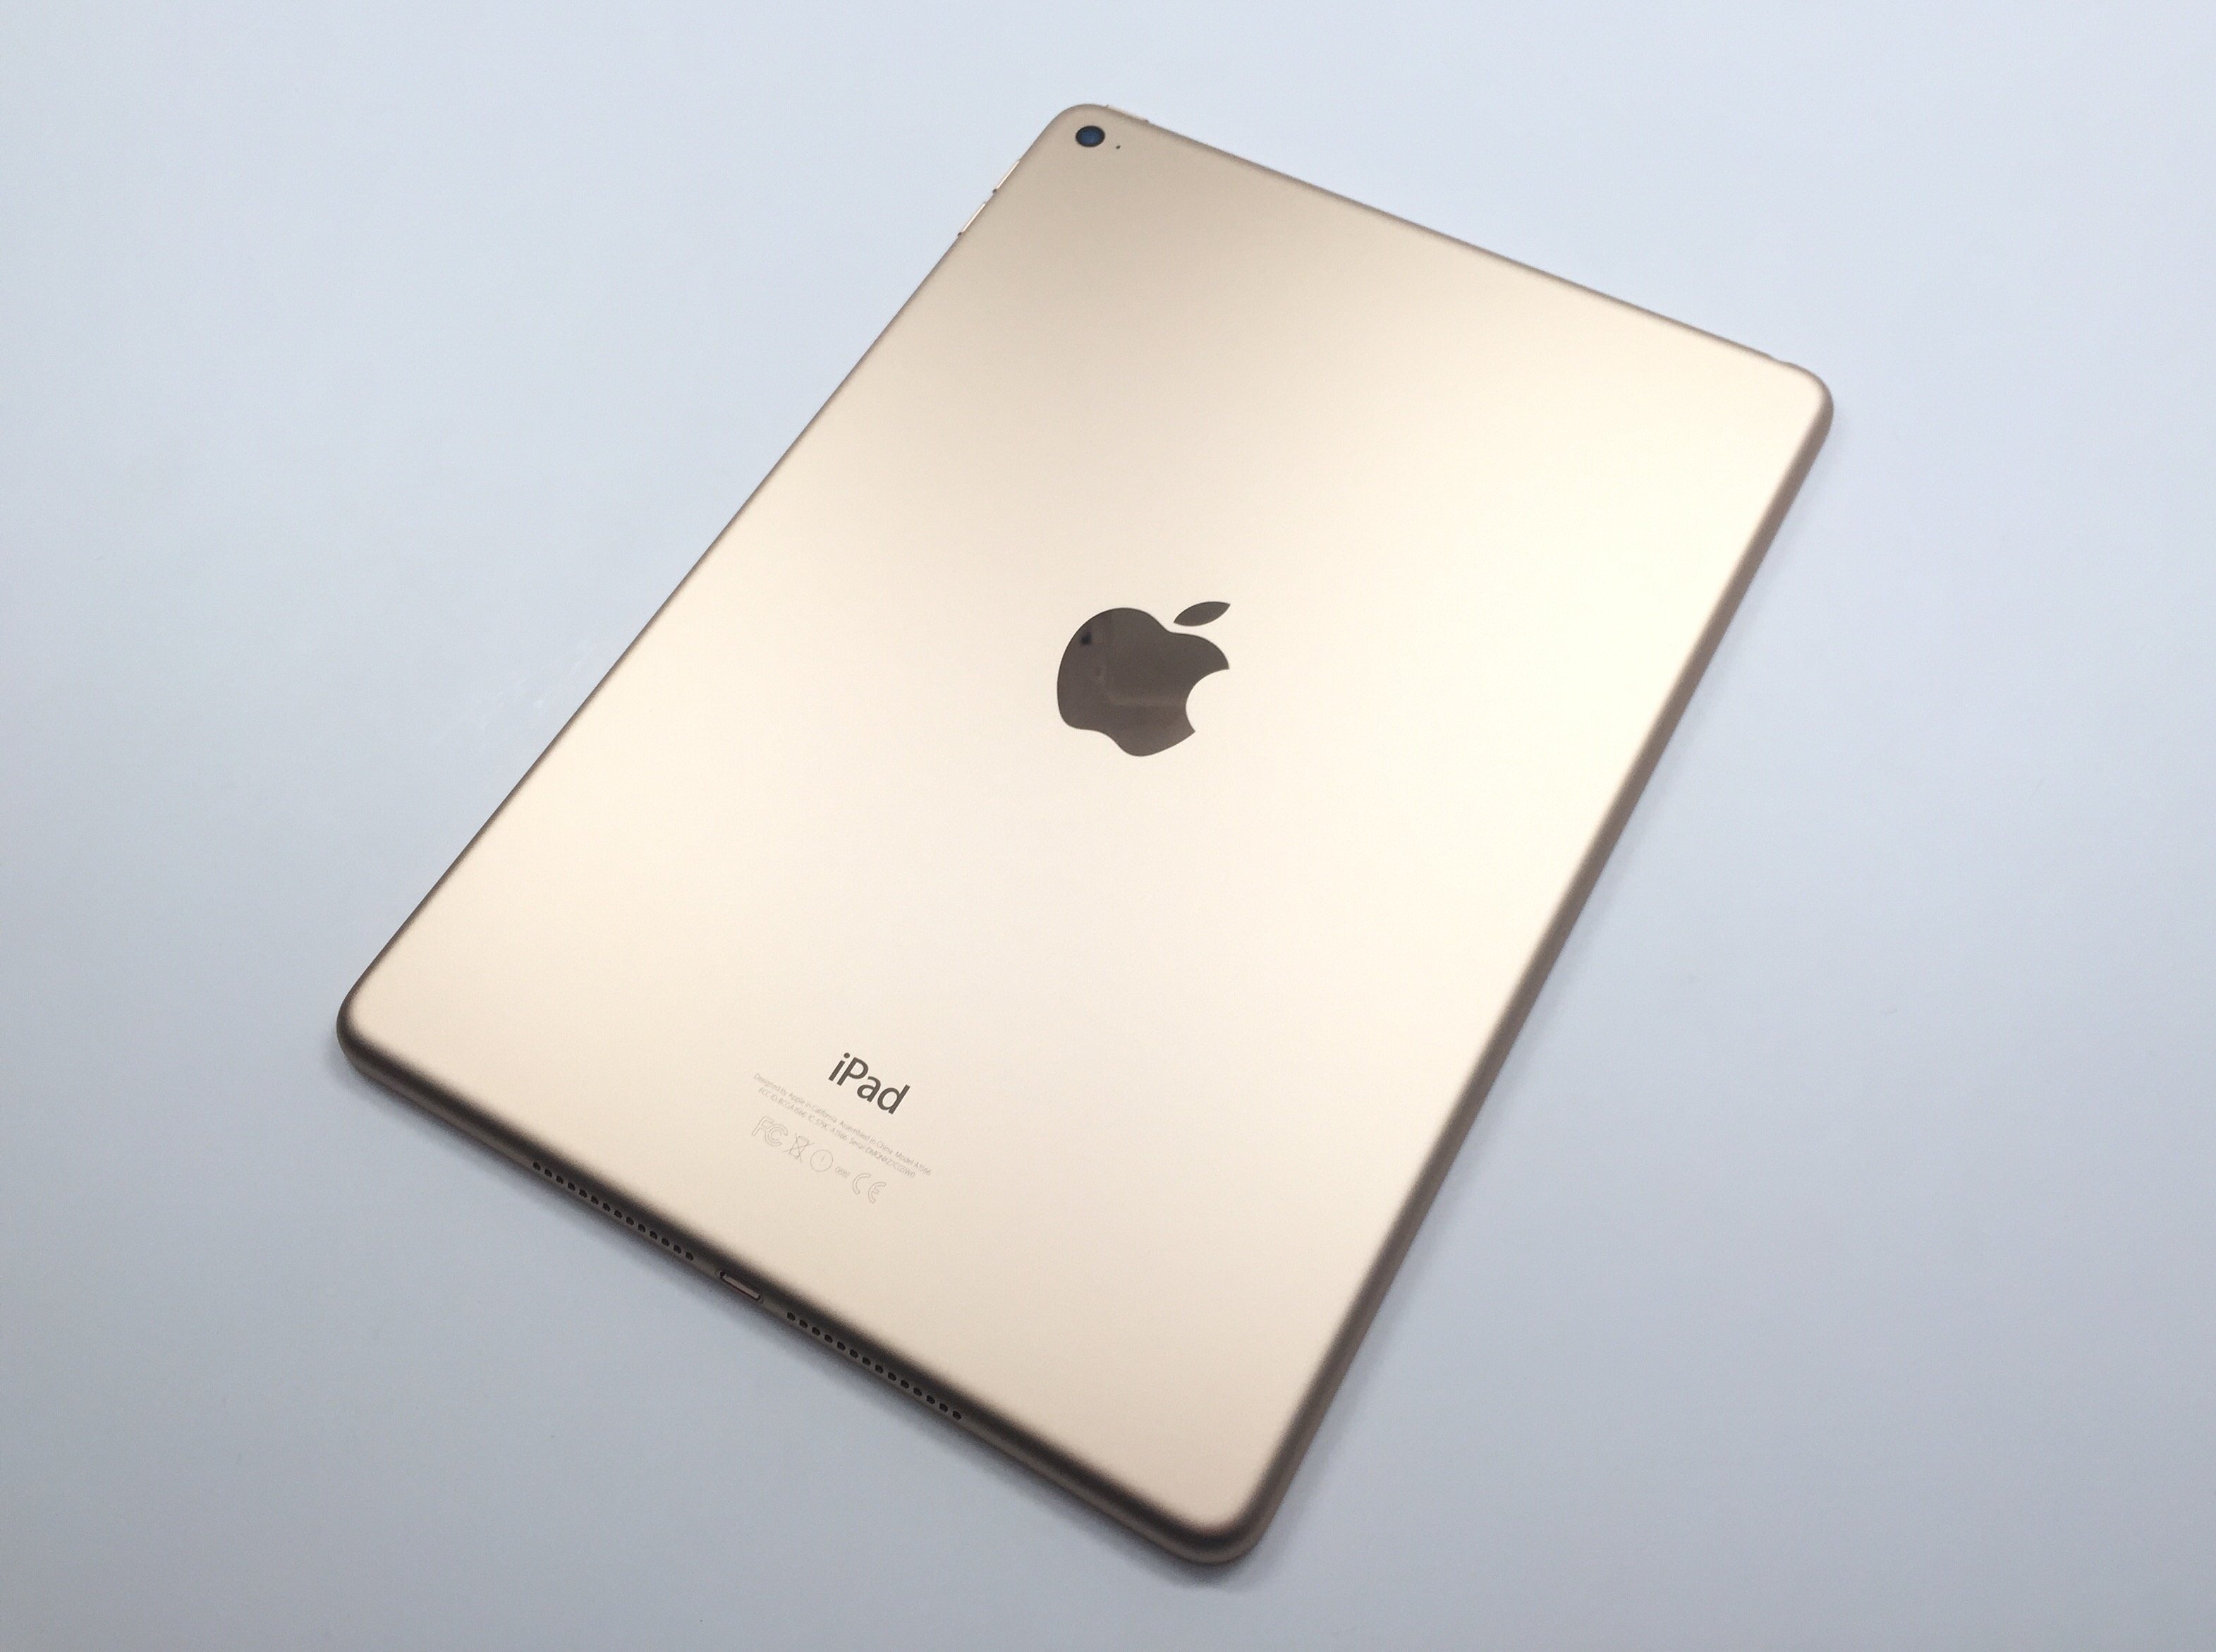 WiFi and Bluetooth connect fast and stay connected on the iPad Air 2 with iOS 8.1.3.